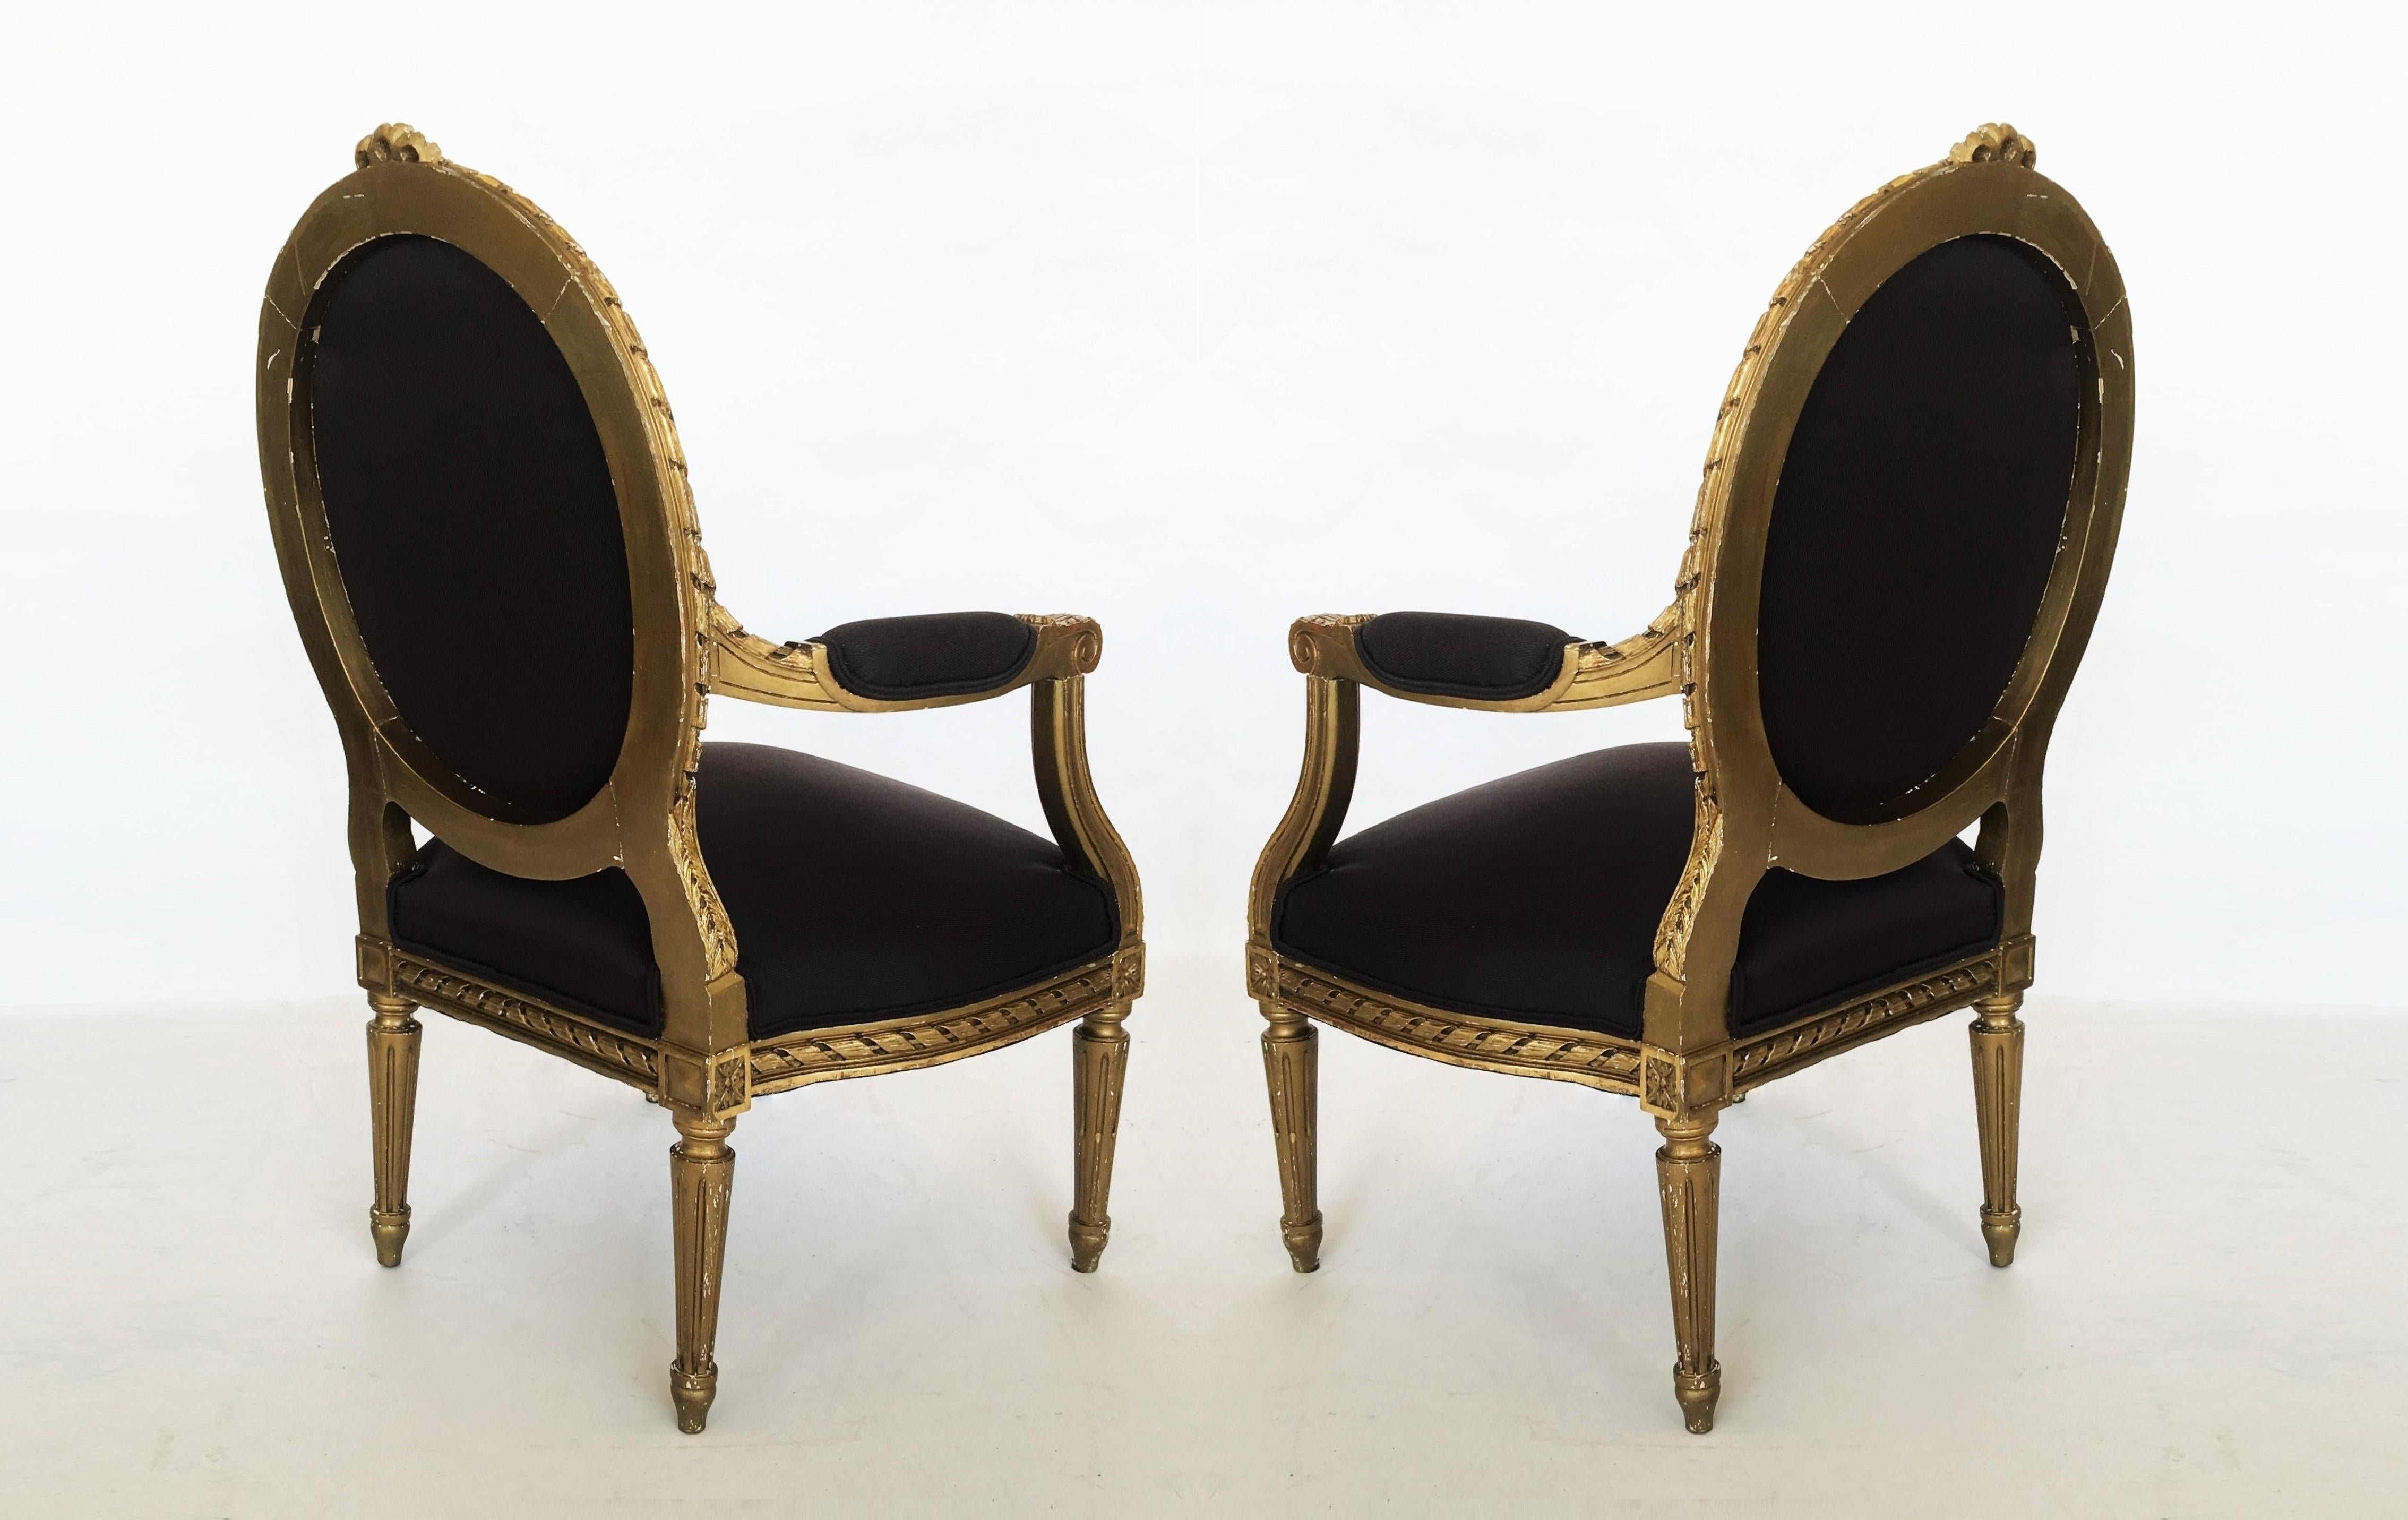 19th Century French Louis XVI Style Giltwood Fauteuils, Pair For Sale 8